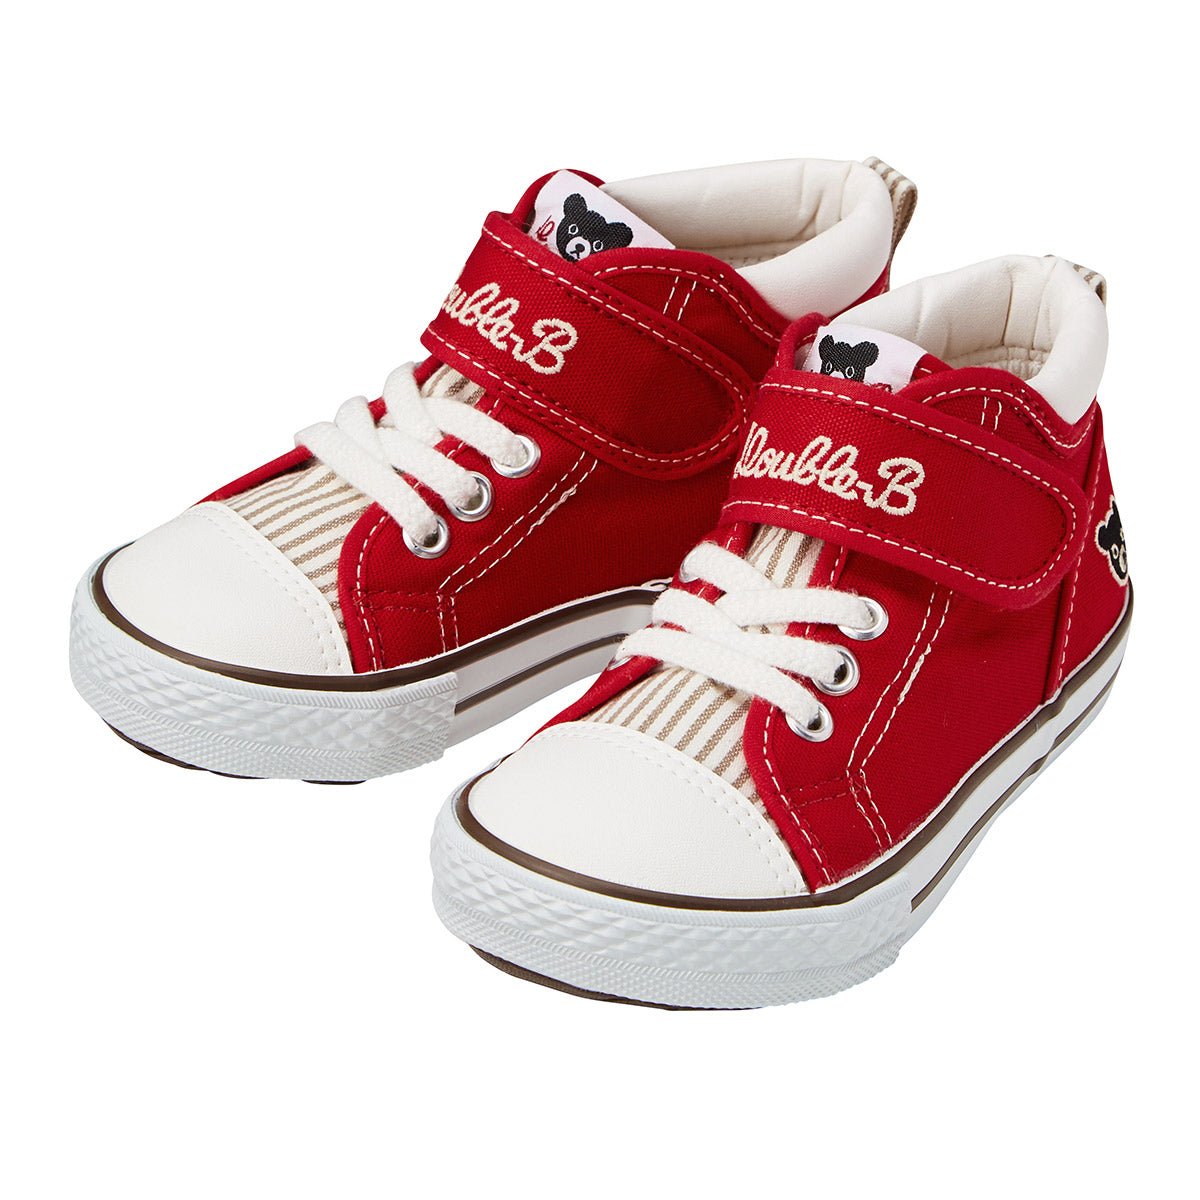 DOUBLE_B High Top Shoes for Kids - Street Style